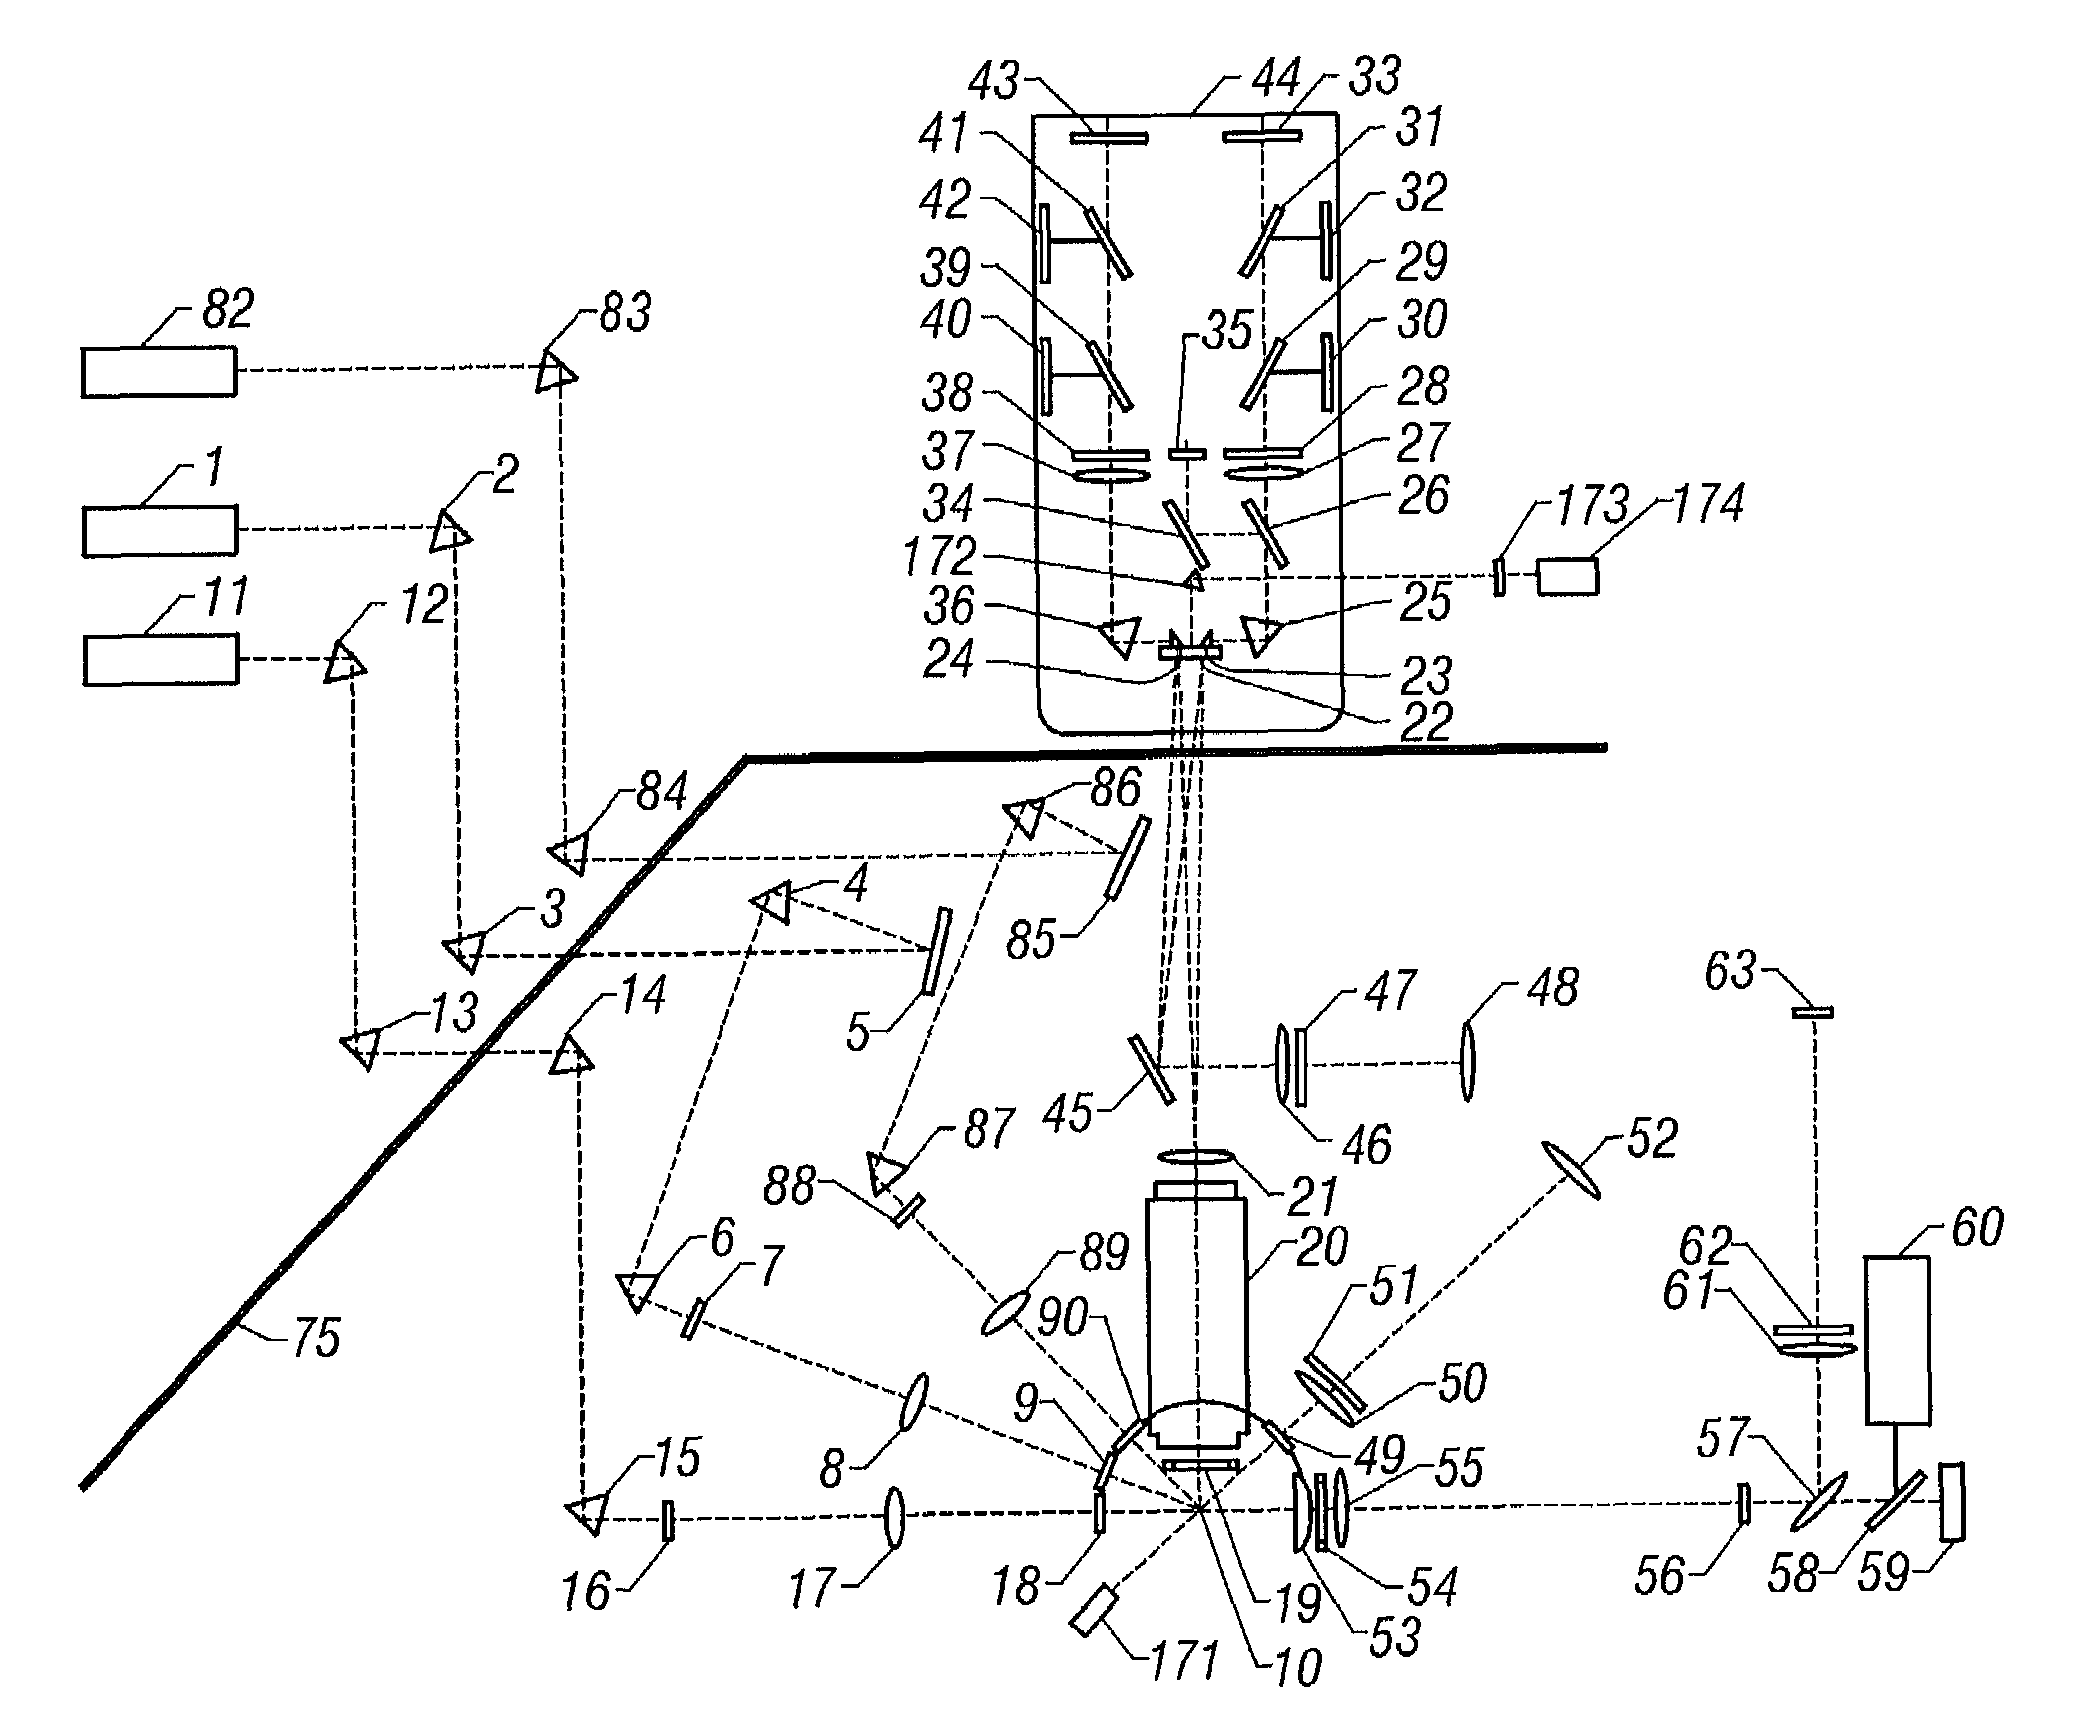 Apparatus for analyzing and sorting biological particles